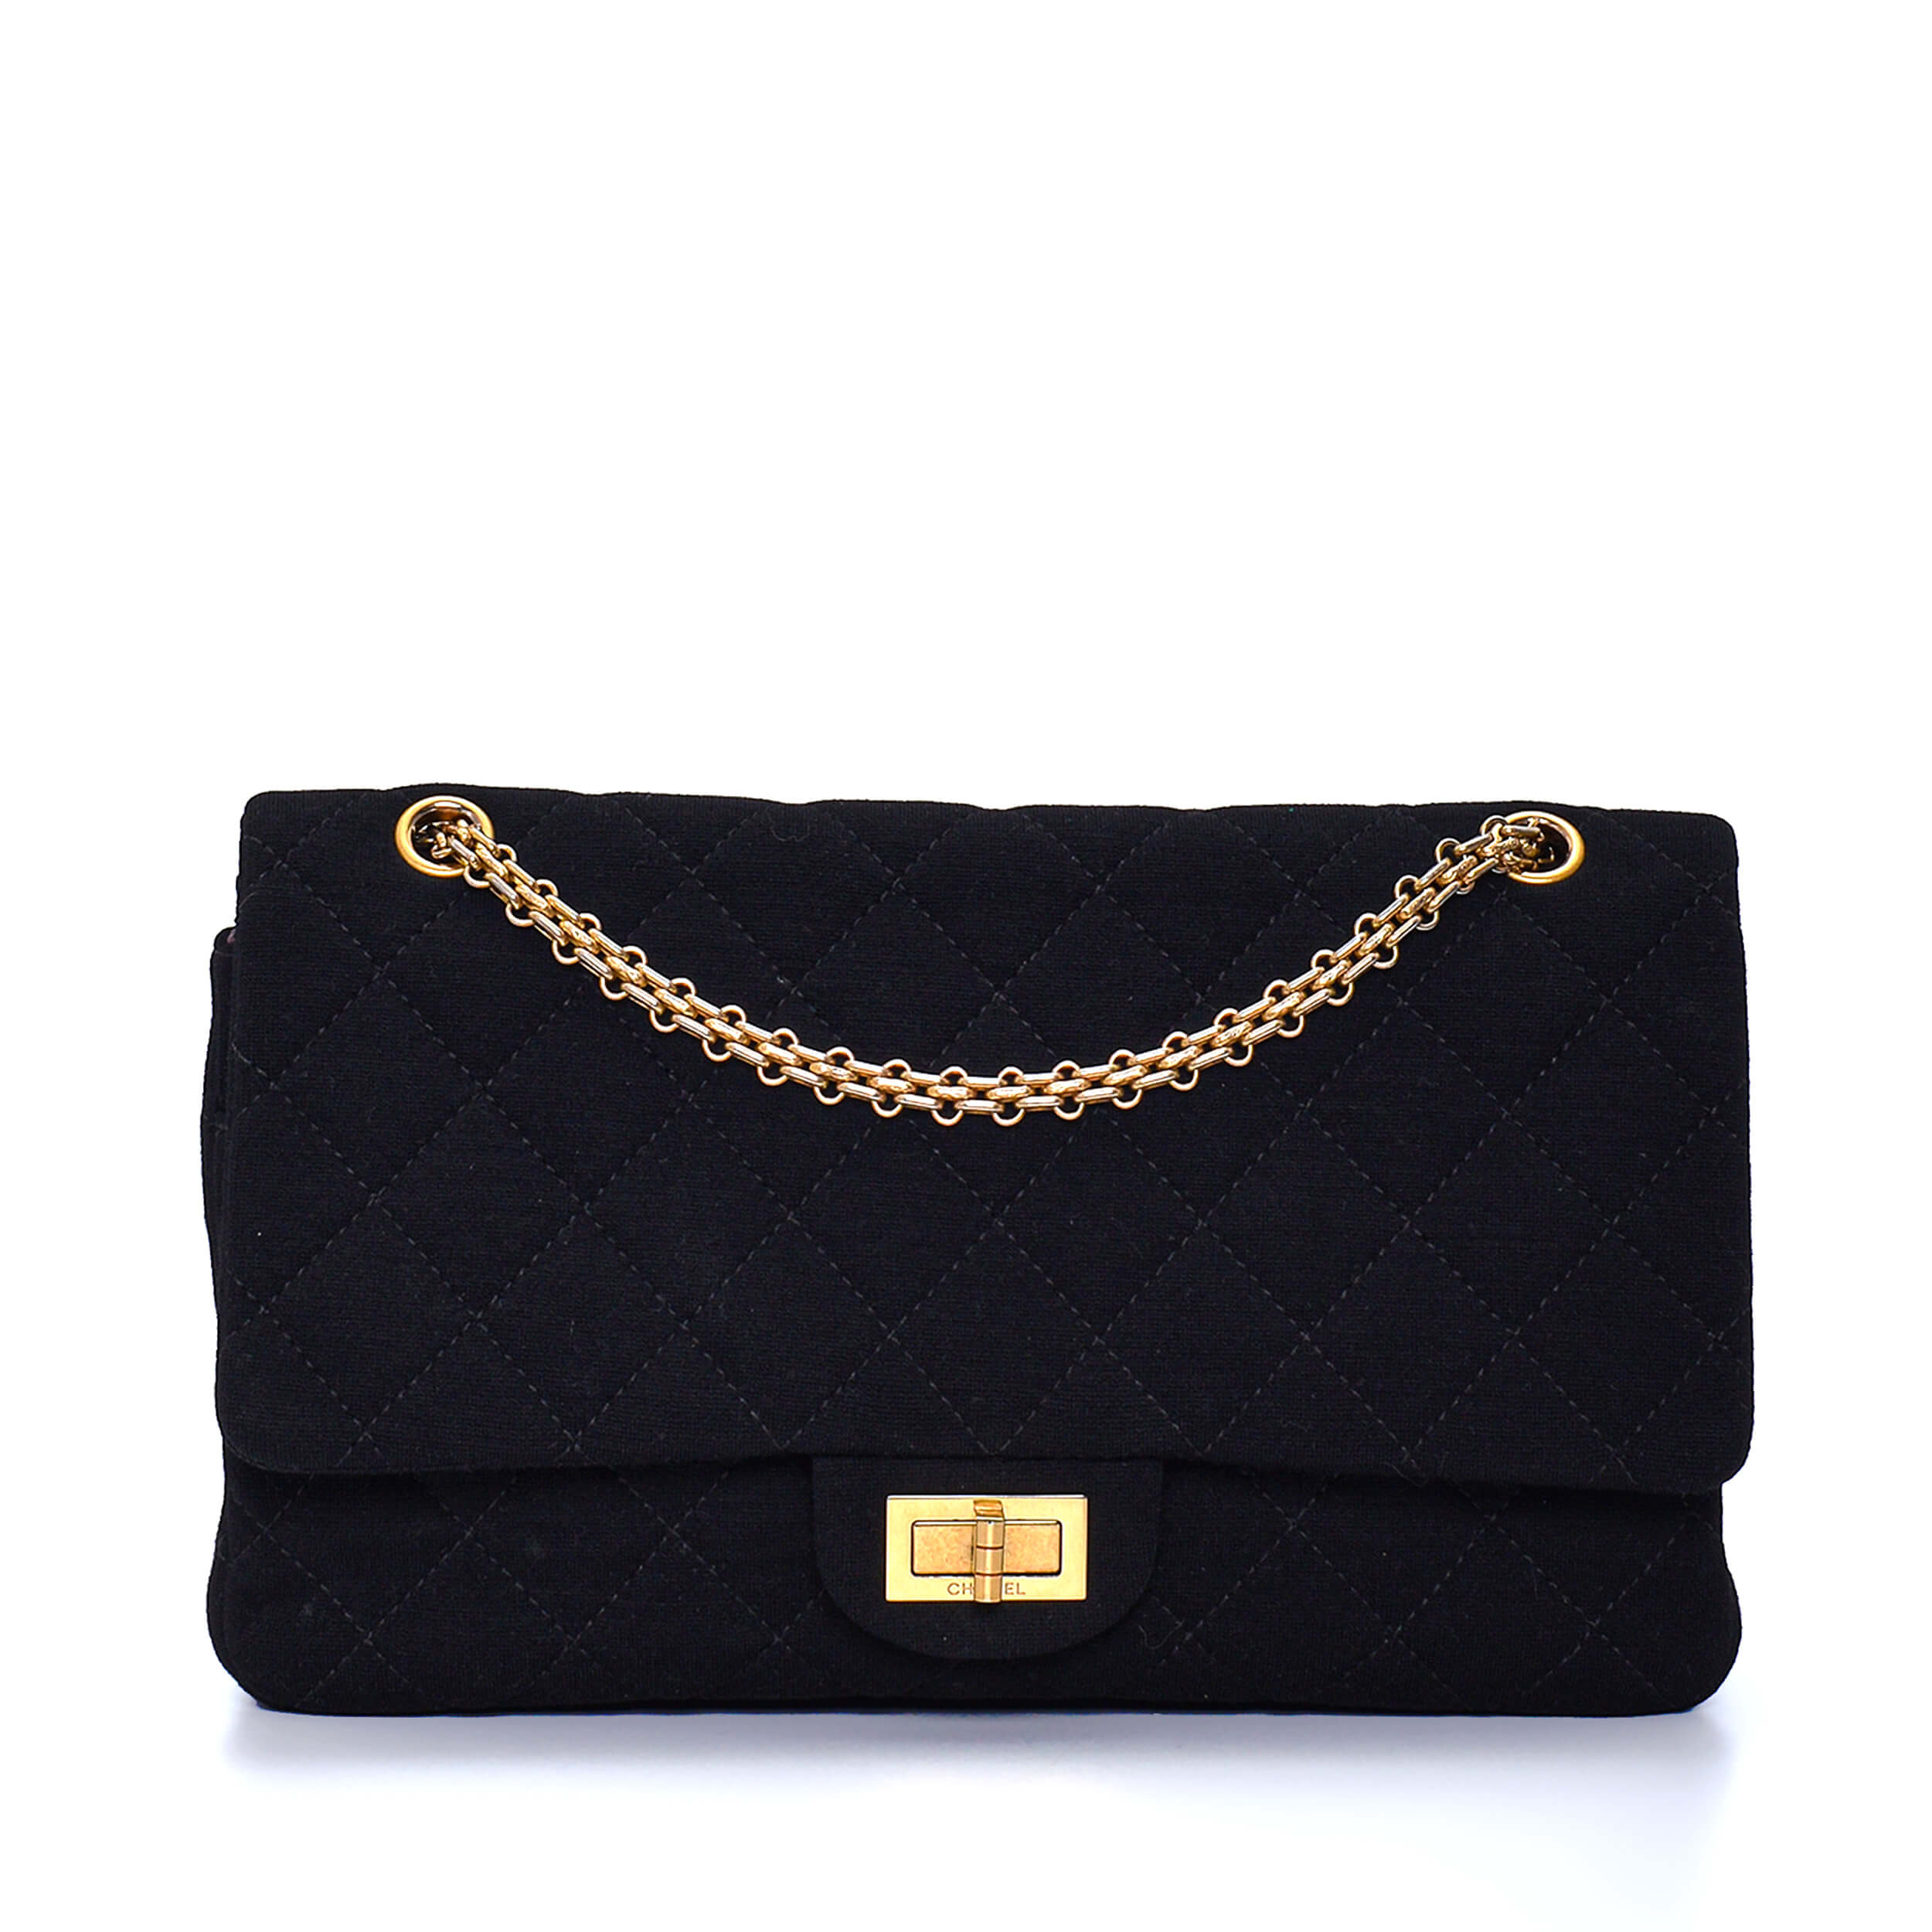  Chanel - Black Quilted Fabric Reissue Double Flap Bag